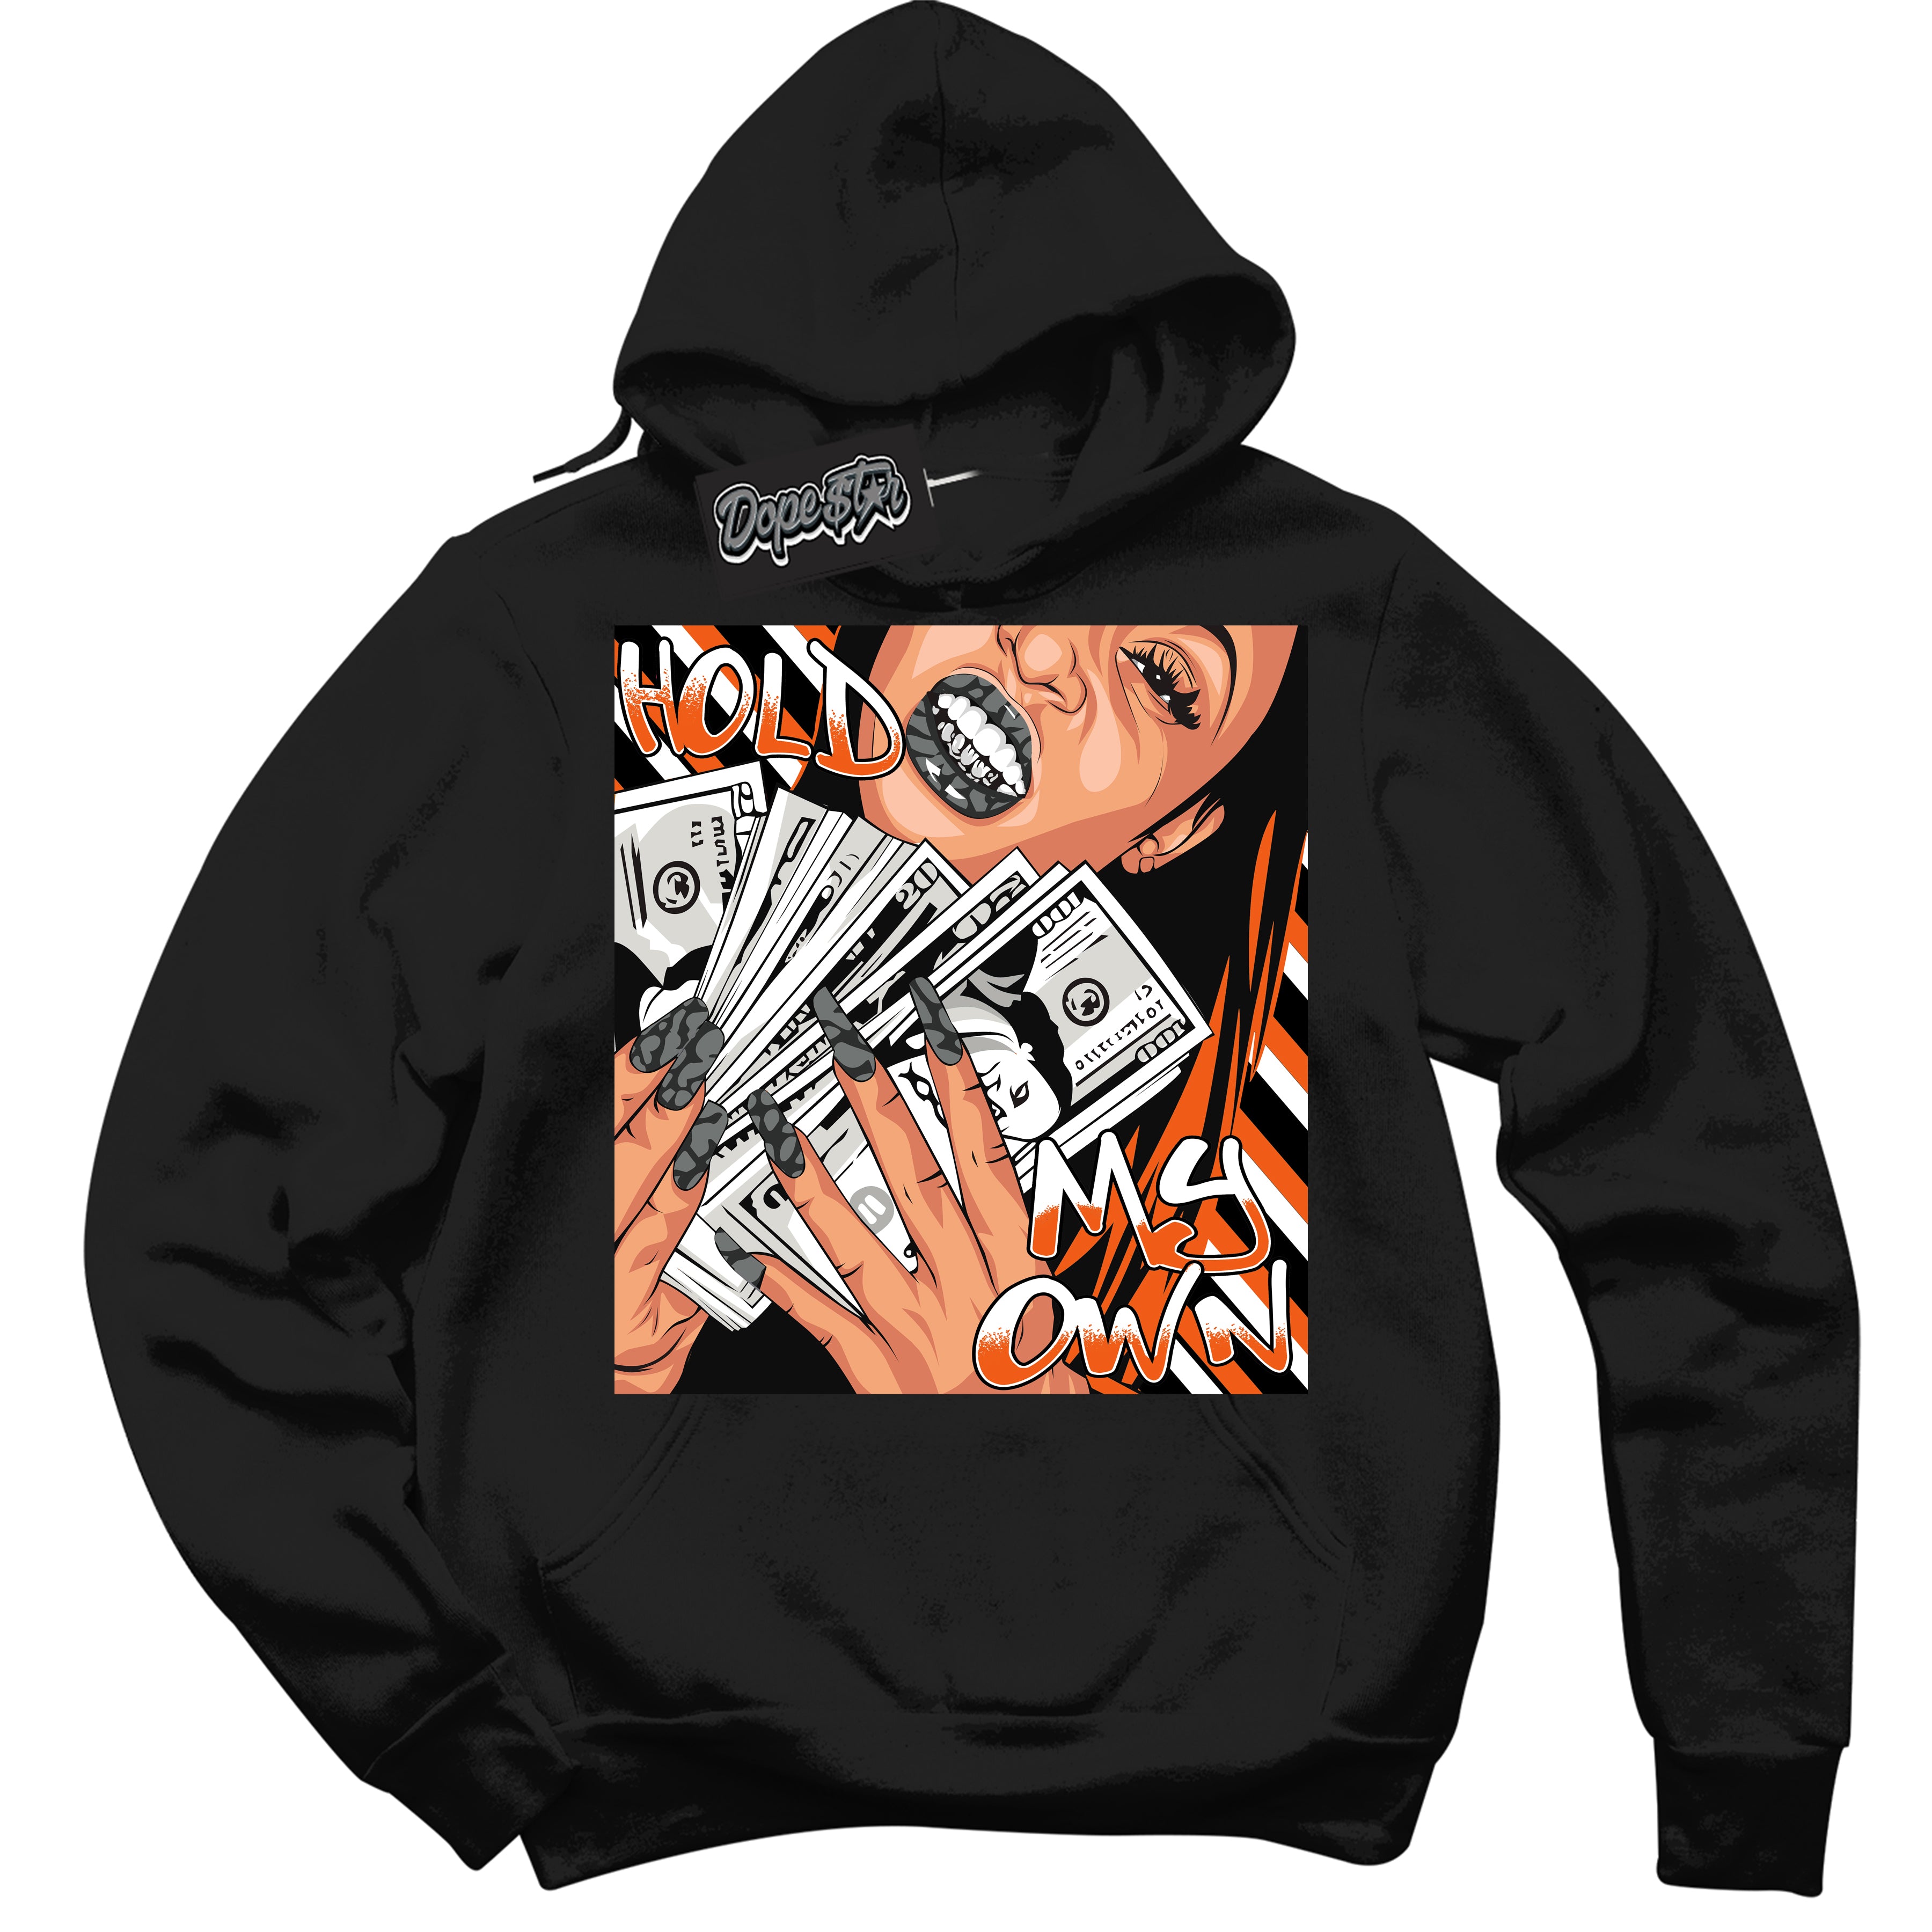 Cool Black Graphic DopeStar Hoodie with “  Hold My Own  “ print, that perfectly matches Fear Pack 3s sneakers